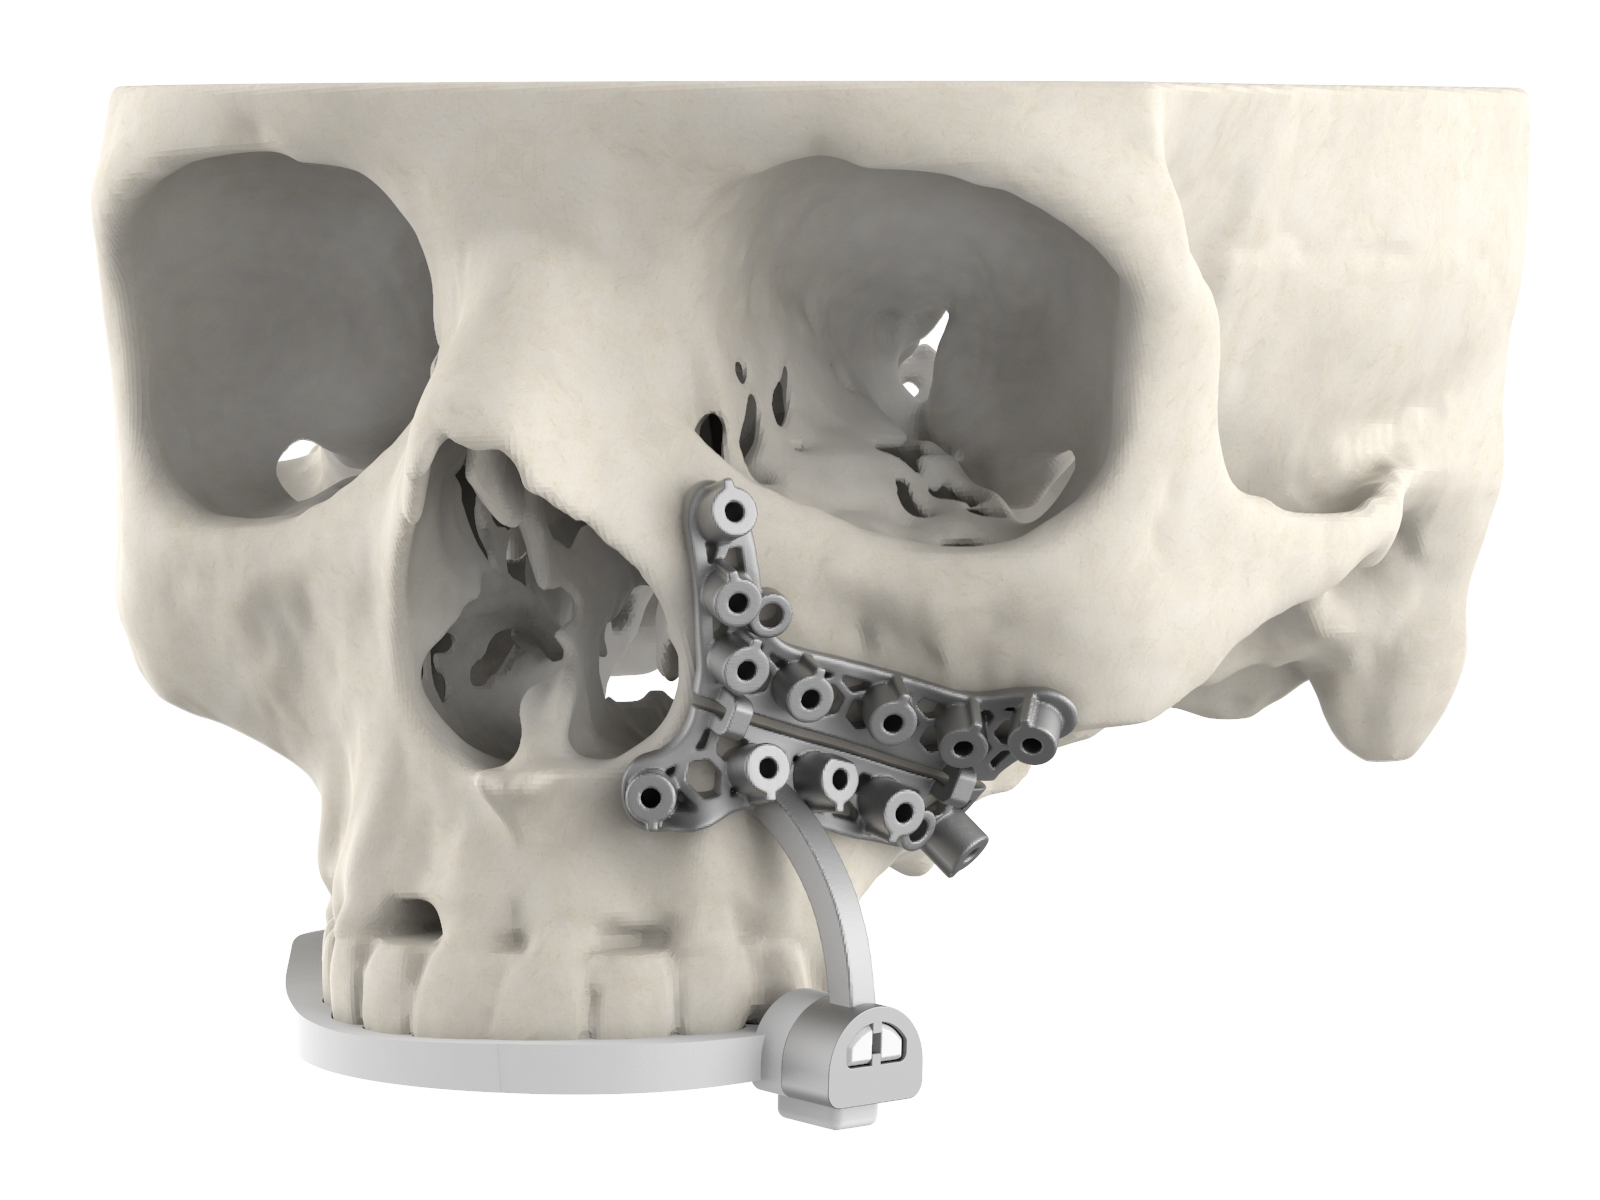 An image of 3D Systems' new surgical guide attached to a skull